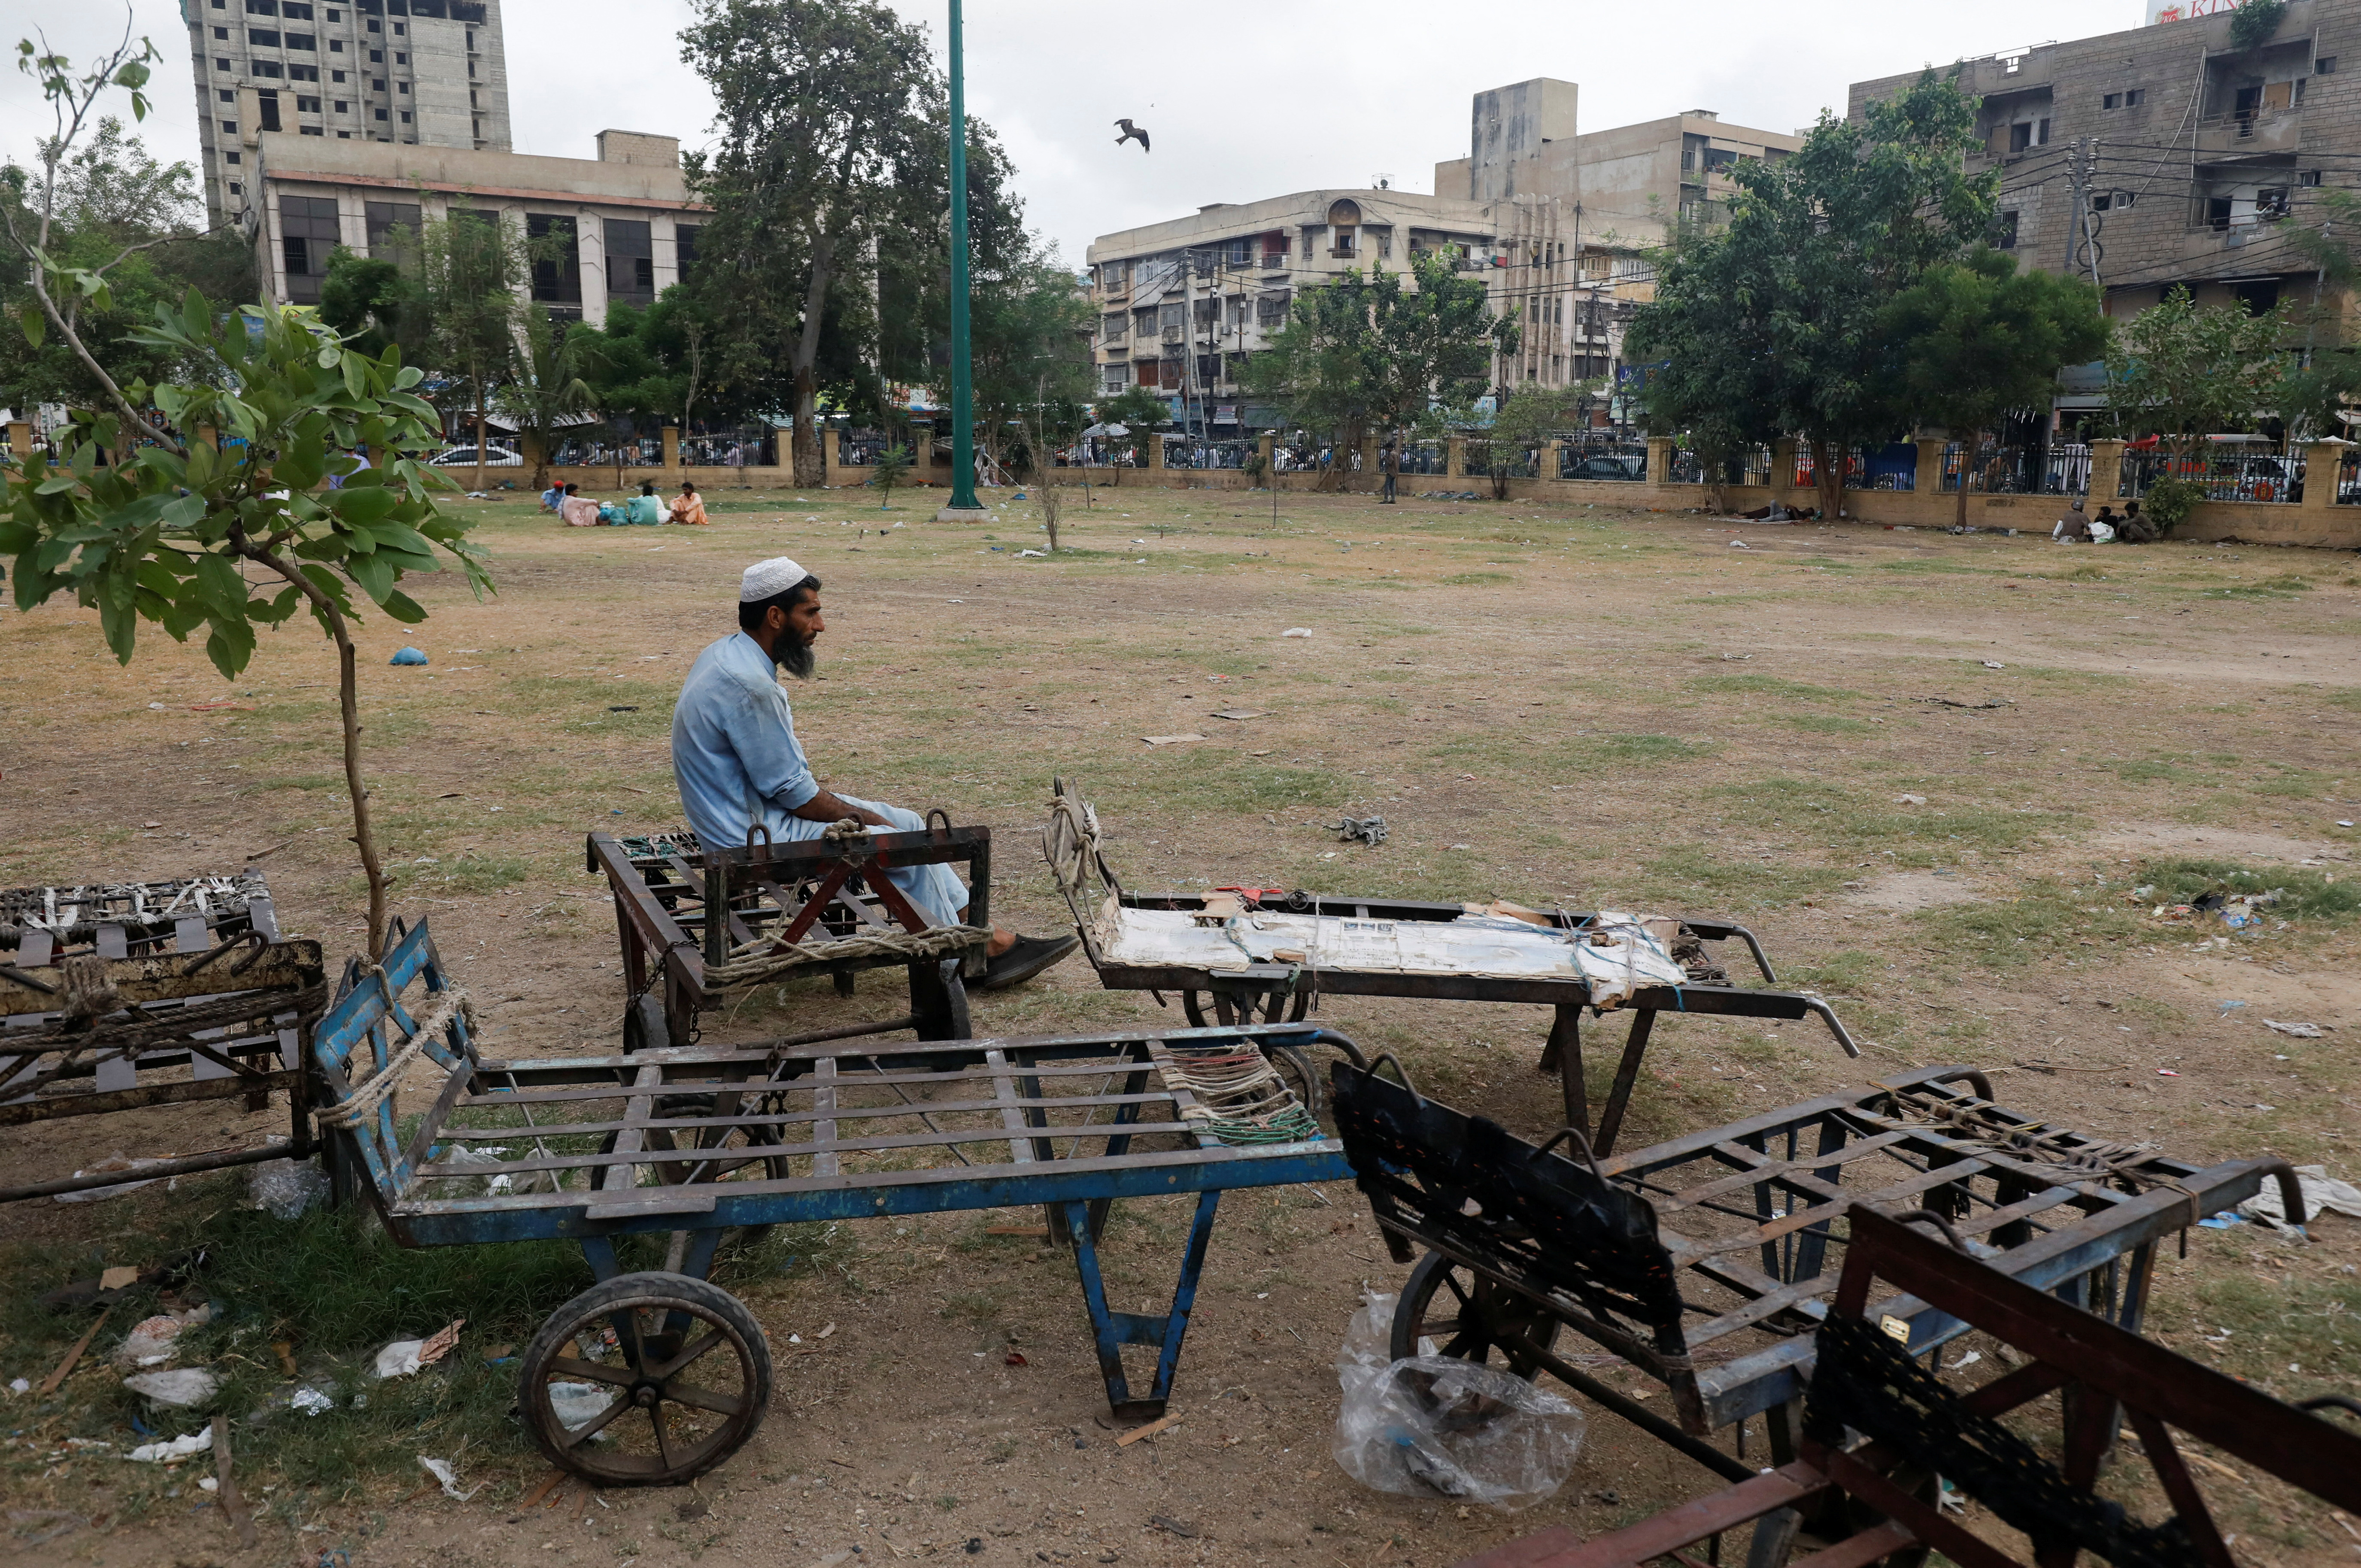 Labourer waits for work while sitting beside push trollies outside a market in Karachi